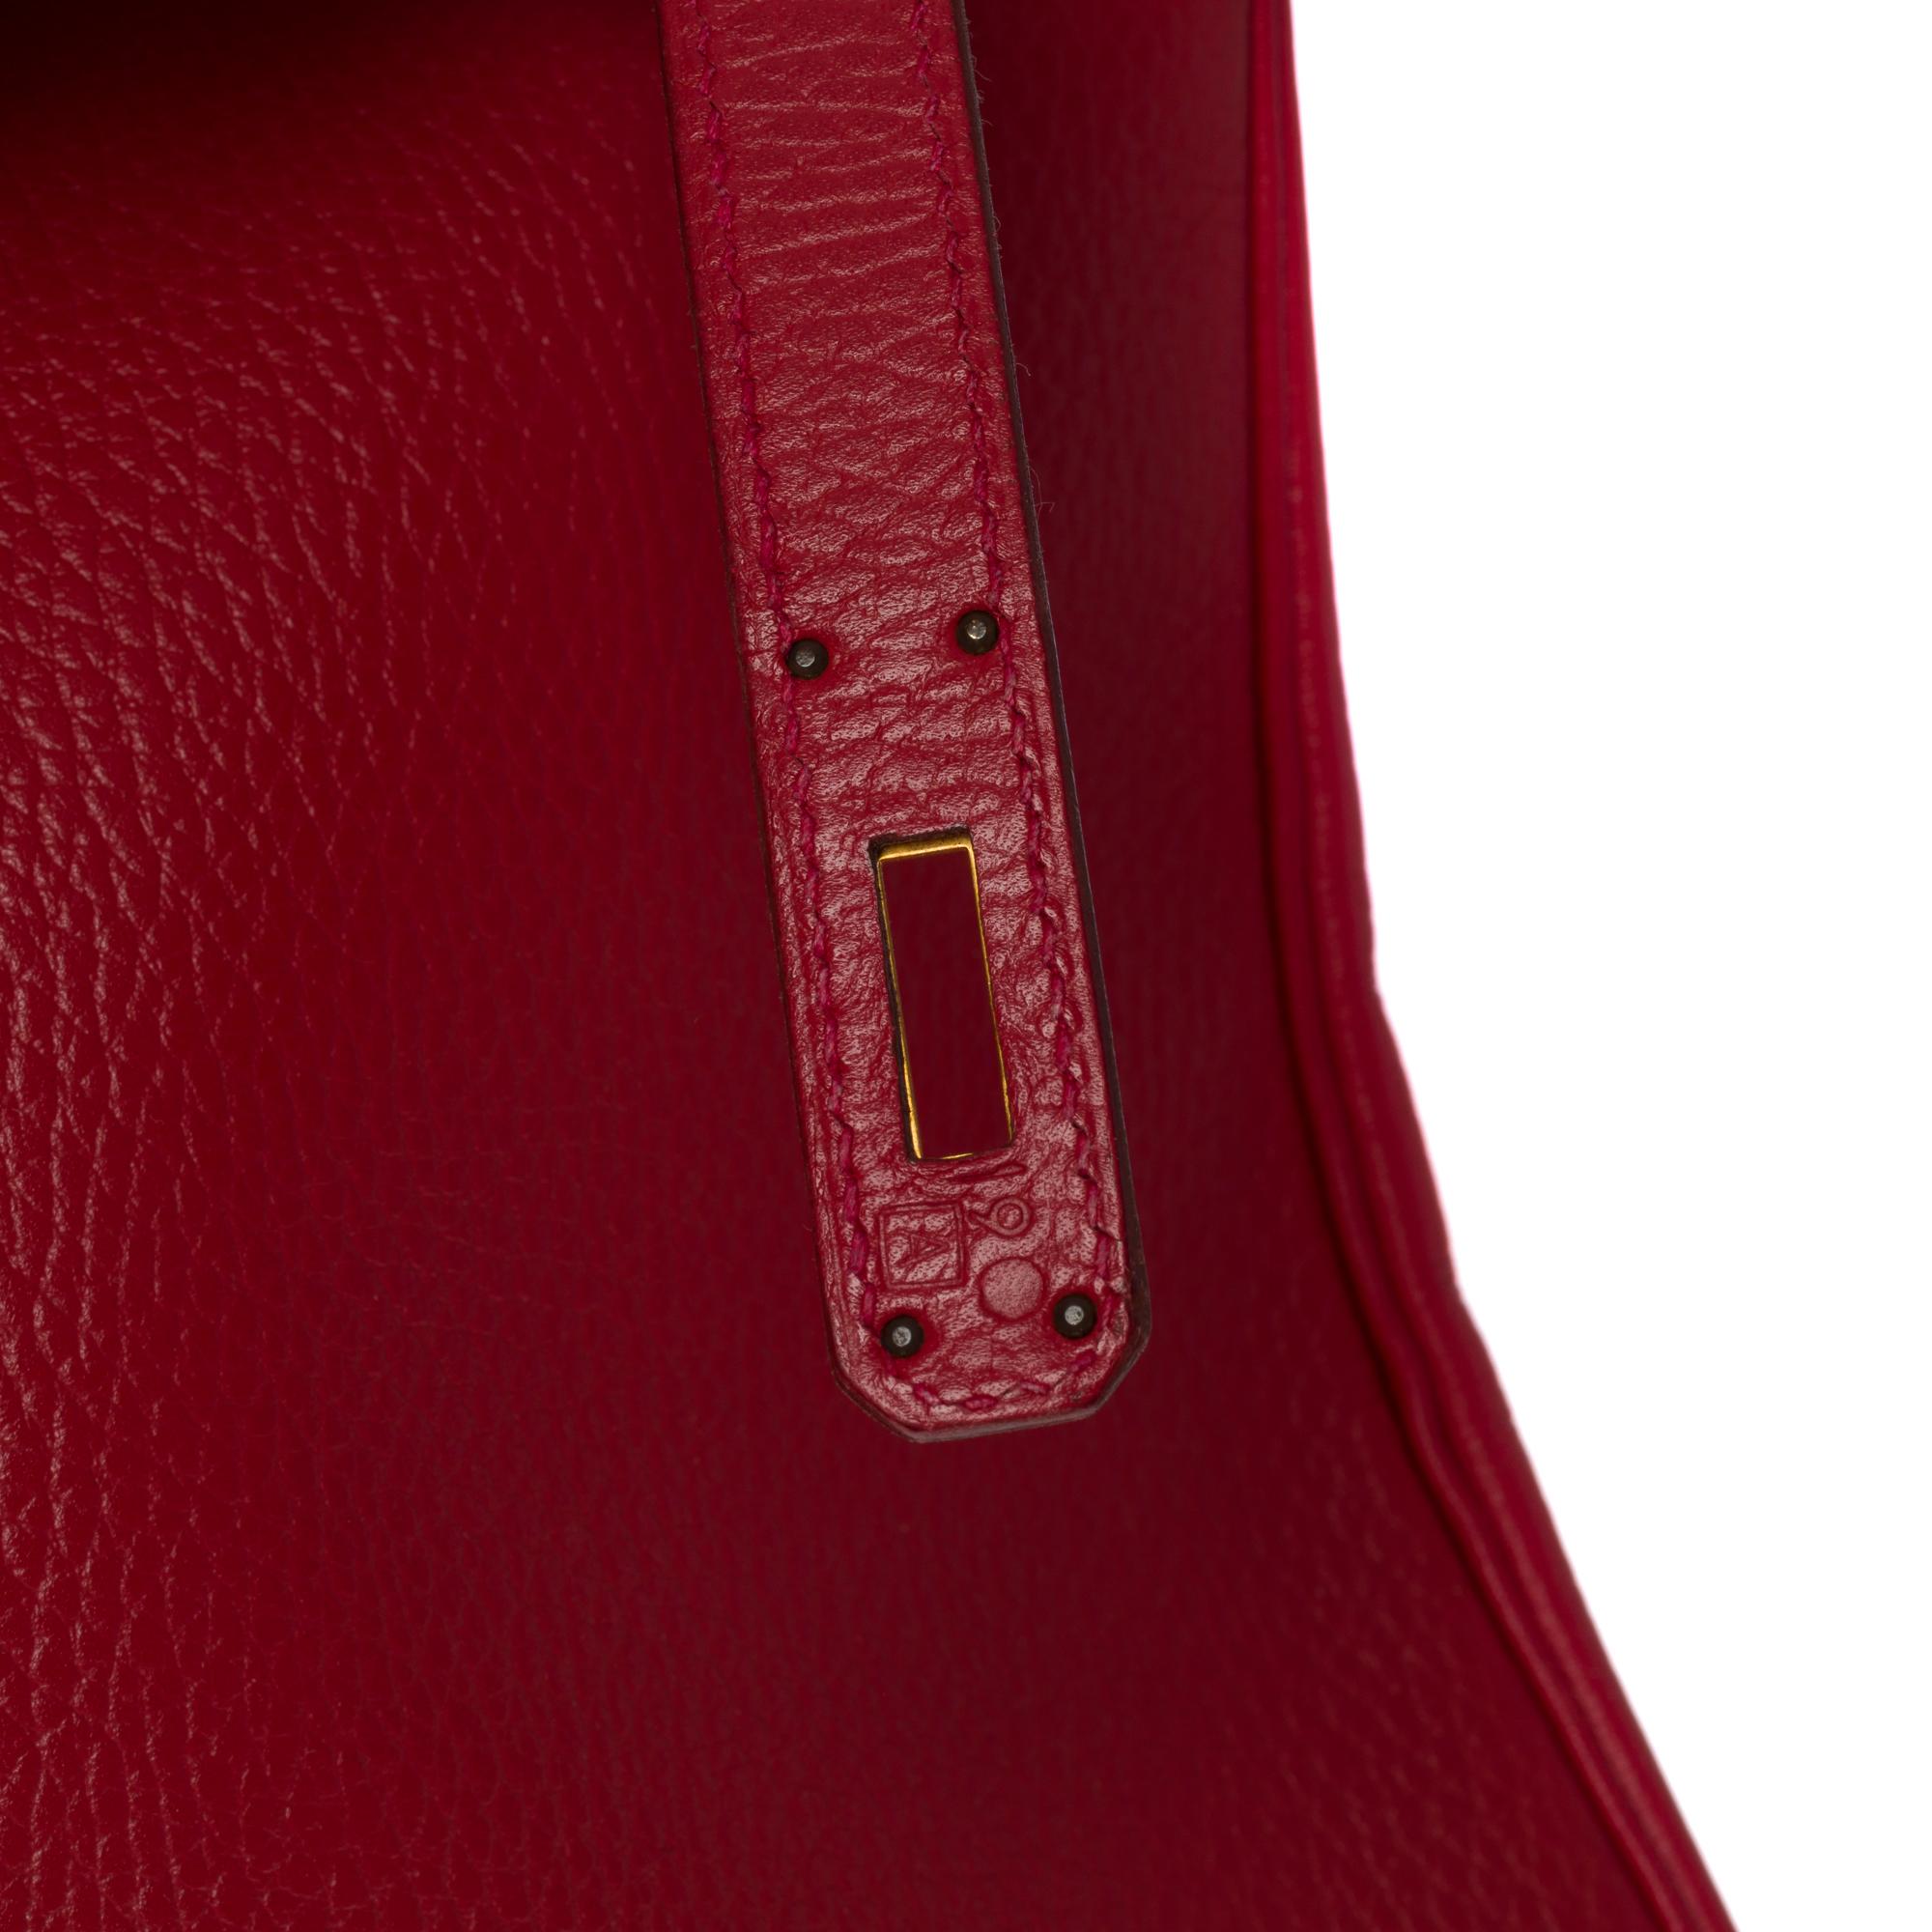 Rare & Collector Hermes Birkin 40cm handbag in Red Vache Ardennes leather, GHW For Sale 3